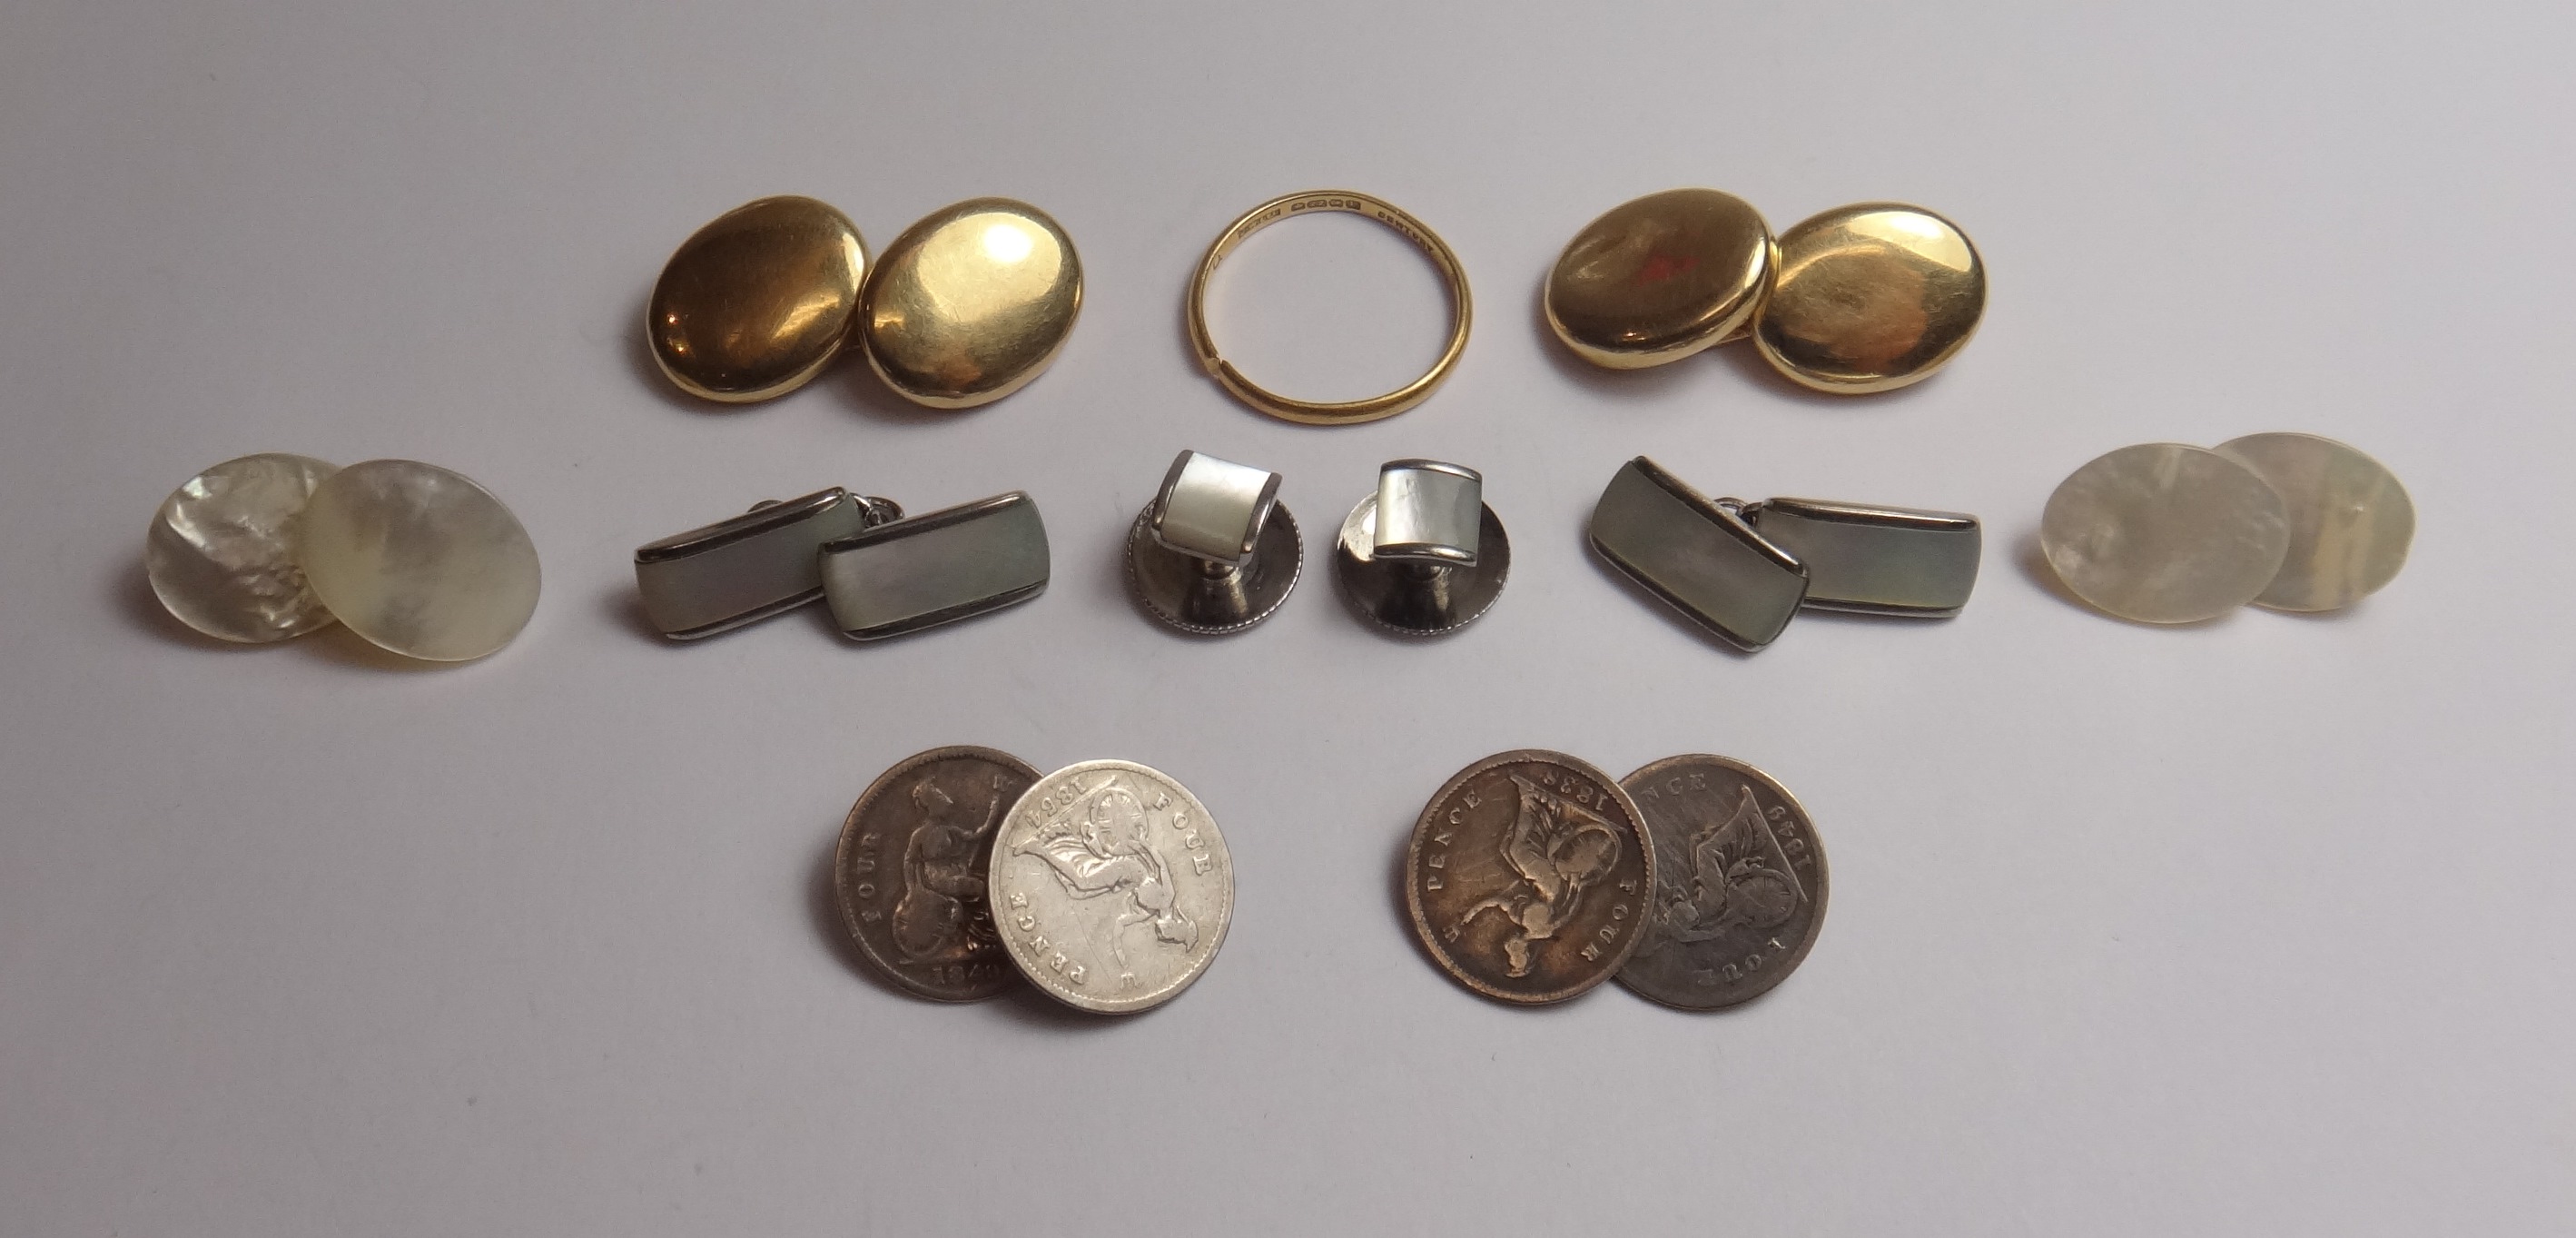 A pair of gold hollow cufflinks, with oval backs and fronts connected by a bar, detailed 18, gross